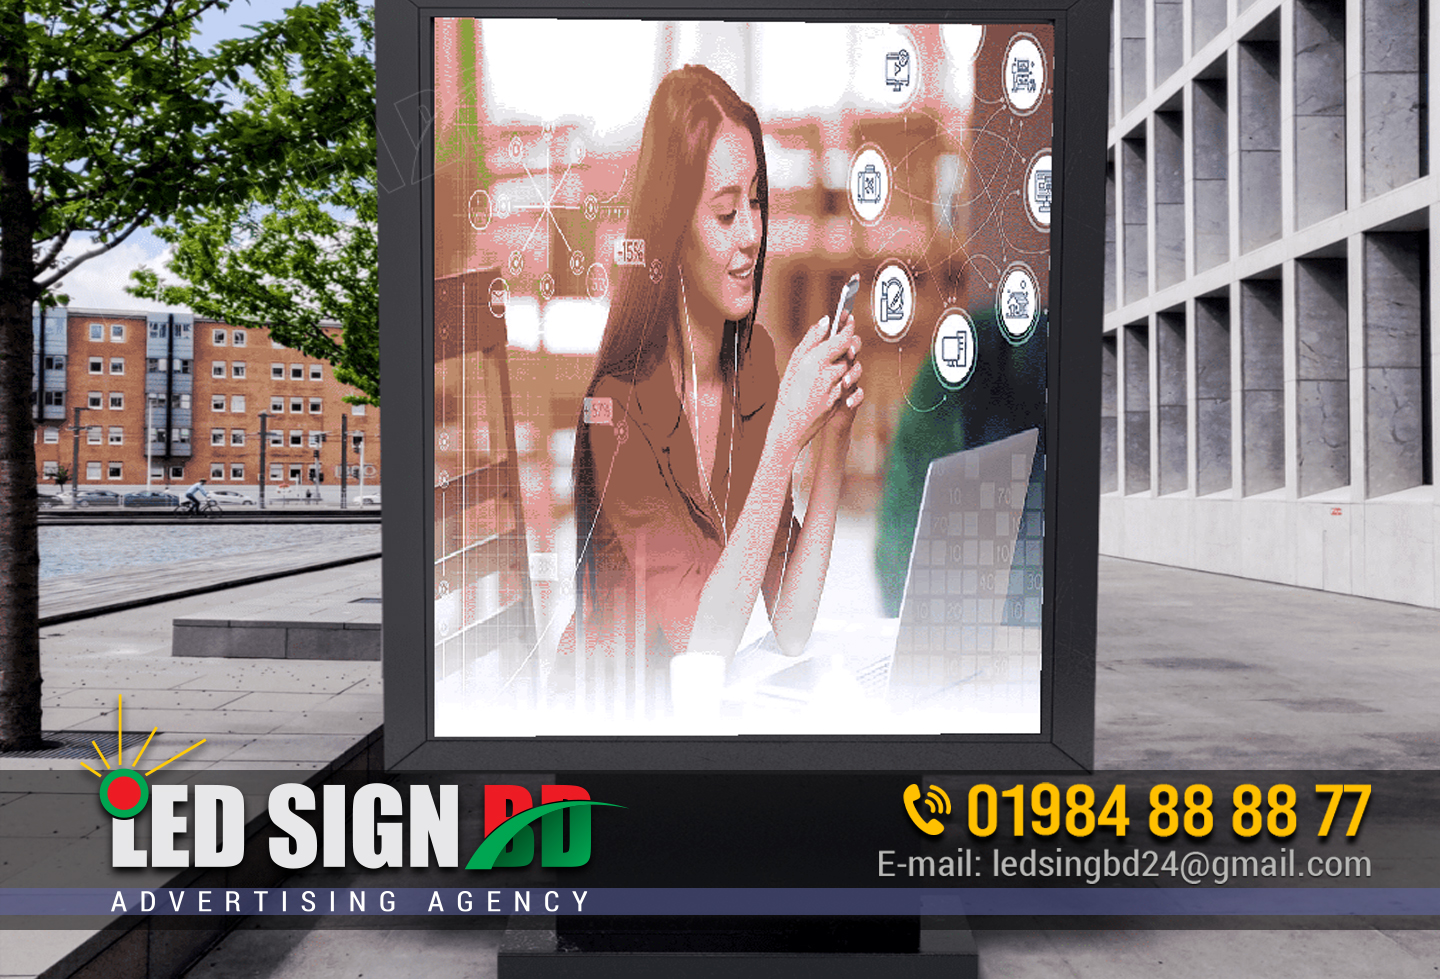 P6 Outdoor LED Display Video Wall price in Dhaka Bangladesh, 56 Inches Digital Standee, Input Voltage: 240 V, Resolution: 1920 X 1080 Pixels, Advertising LED Display Screen P8 Outdoor in Dhaka Bangladesh, P4 P5 P6 outdoor street lighting pole vertical digital signage signs LED advertising screen bd, Outdoor Scrolling LED Display Board, Stand Led Display Signage